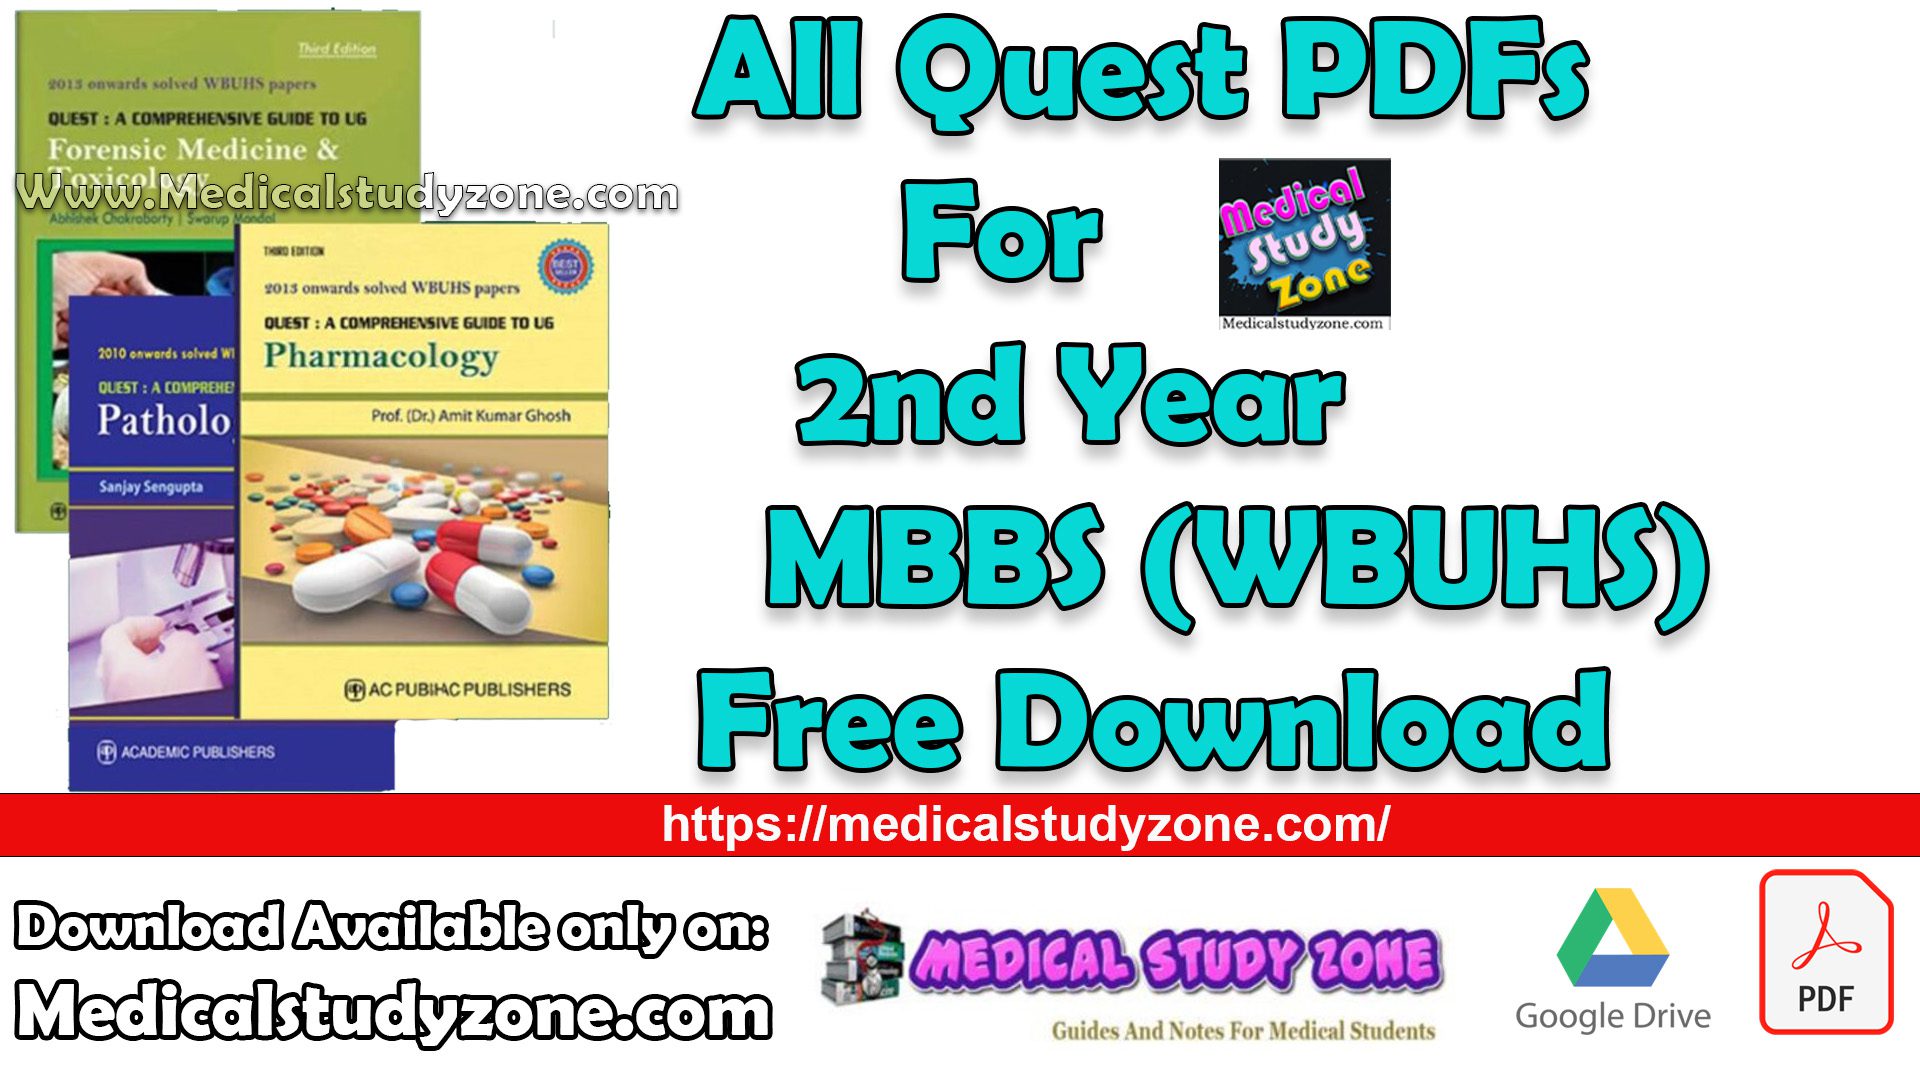 All Quest PDFs For 2nd Year MBBS (WBUHS) Free Download